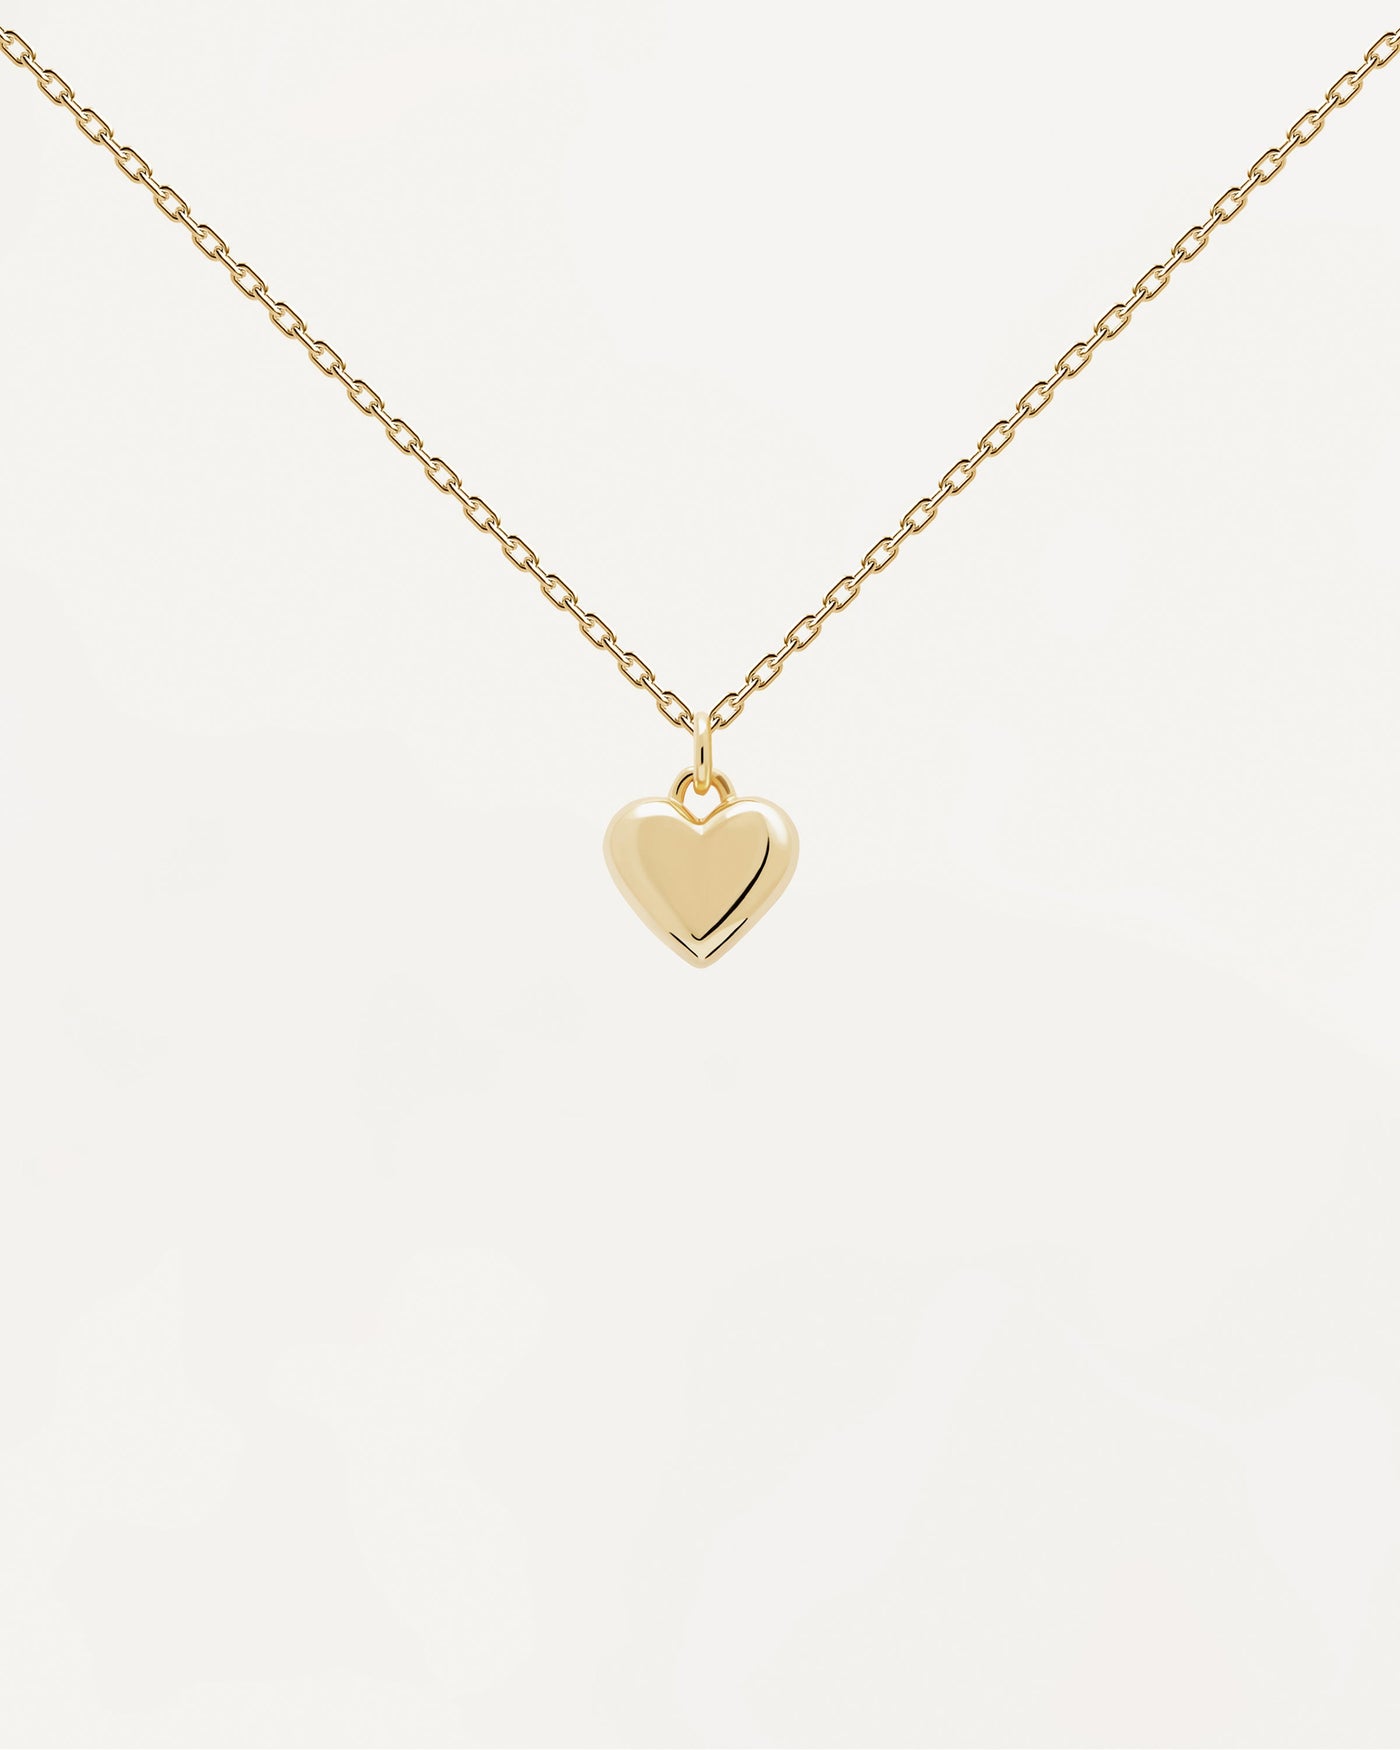 2023 Selection | L'Absolu Necklace. Gold-plated silver necklace with engravable heart pendant to customize. Get the latest arrival from PDPAOLA. Place your order safely and get this Best Seller. Free Shipping.